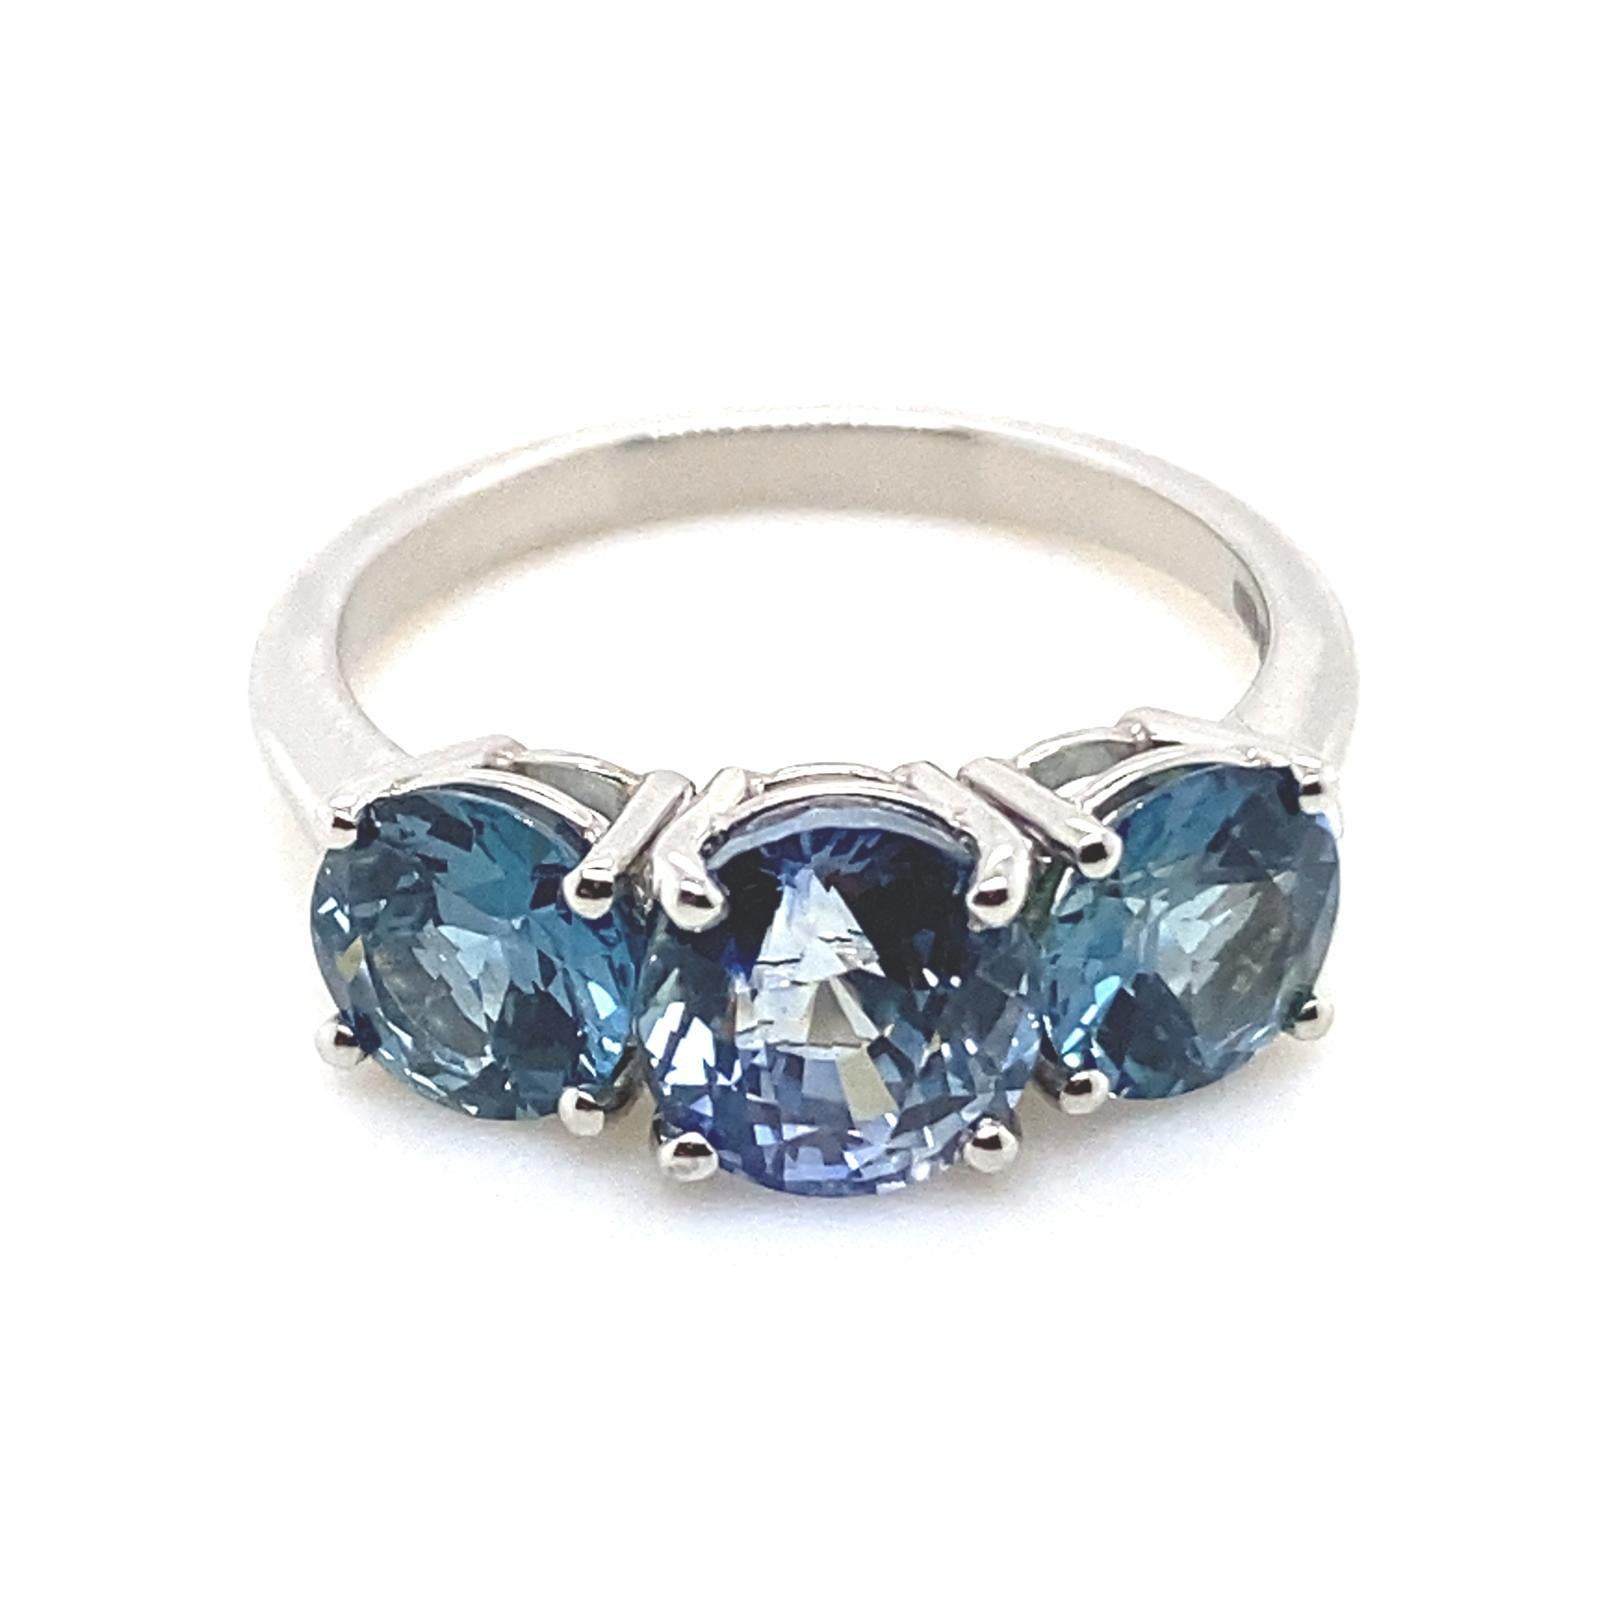 A sapphire three stone platinum engagement ring.

This beautiful sapphire engagement ring is handcrafted in platinum.

Claw set to its centre with a round cut sapphire of deep blue and framed on either side by a round cut sapphire of teal blue, for